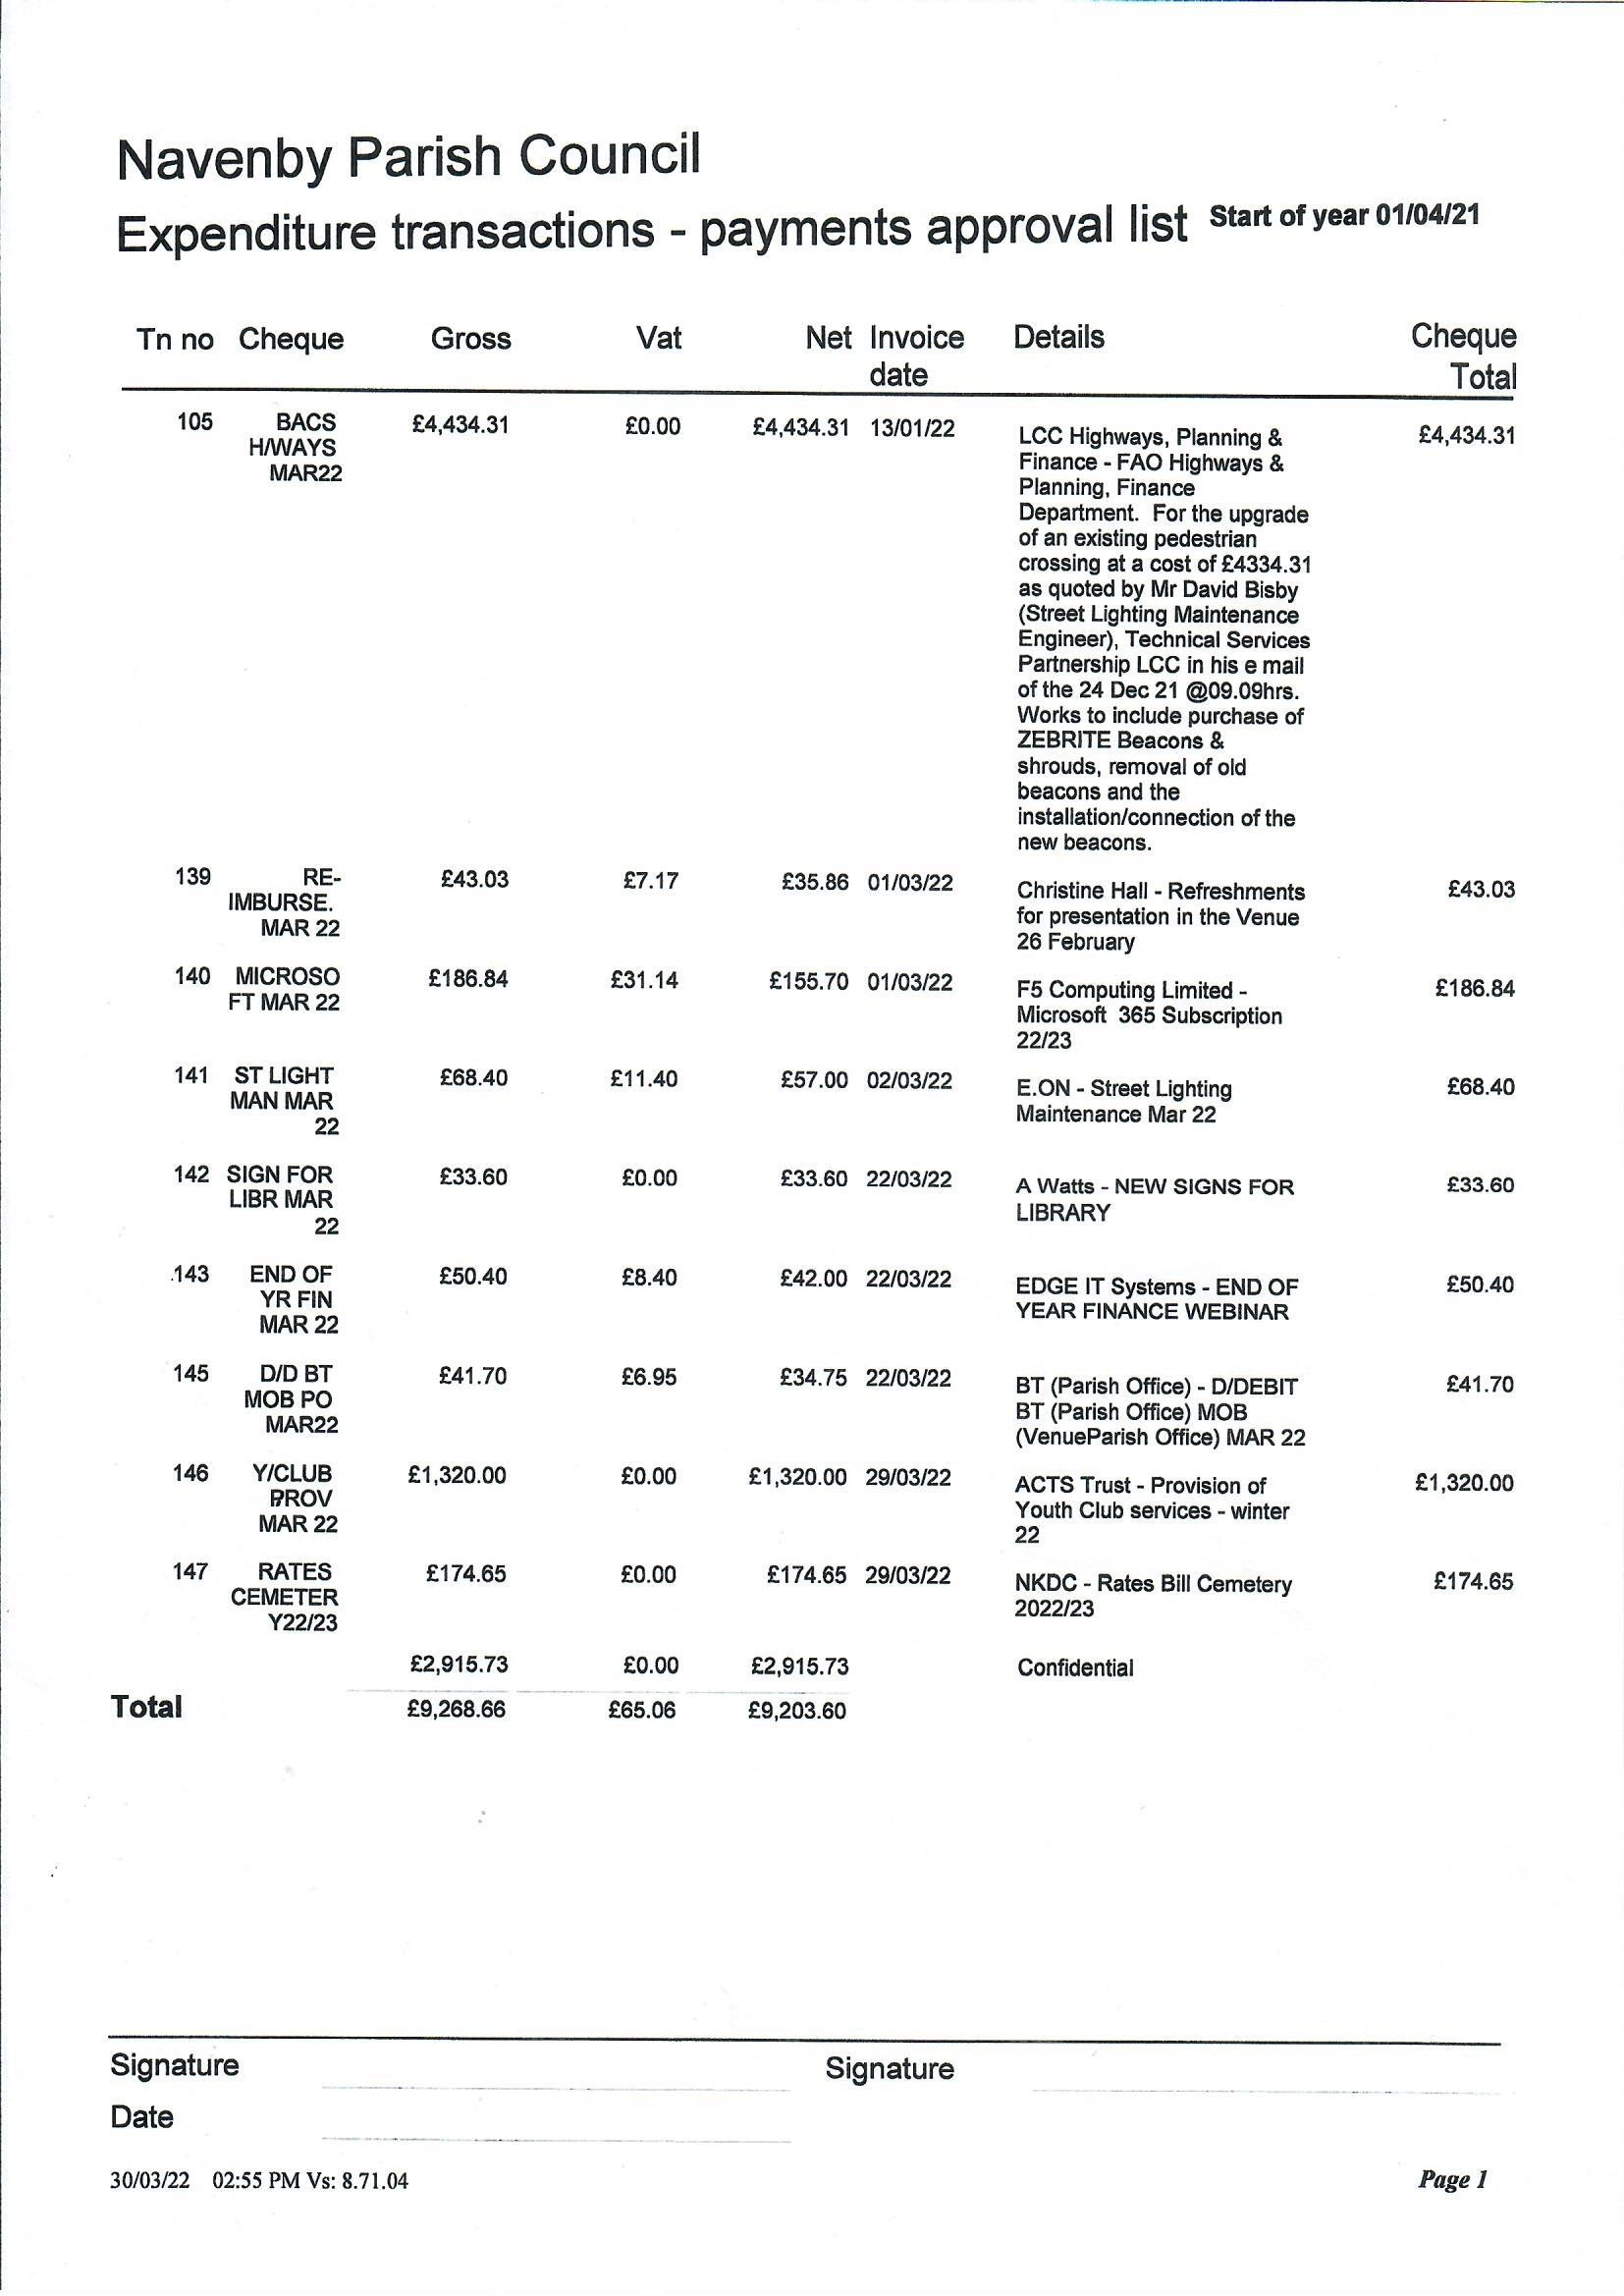 Expenditure approvals for 5 apr 22 page 1